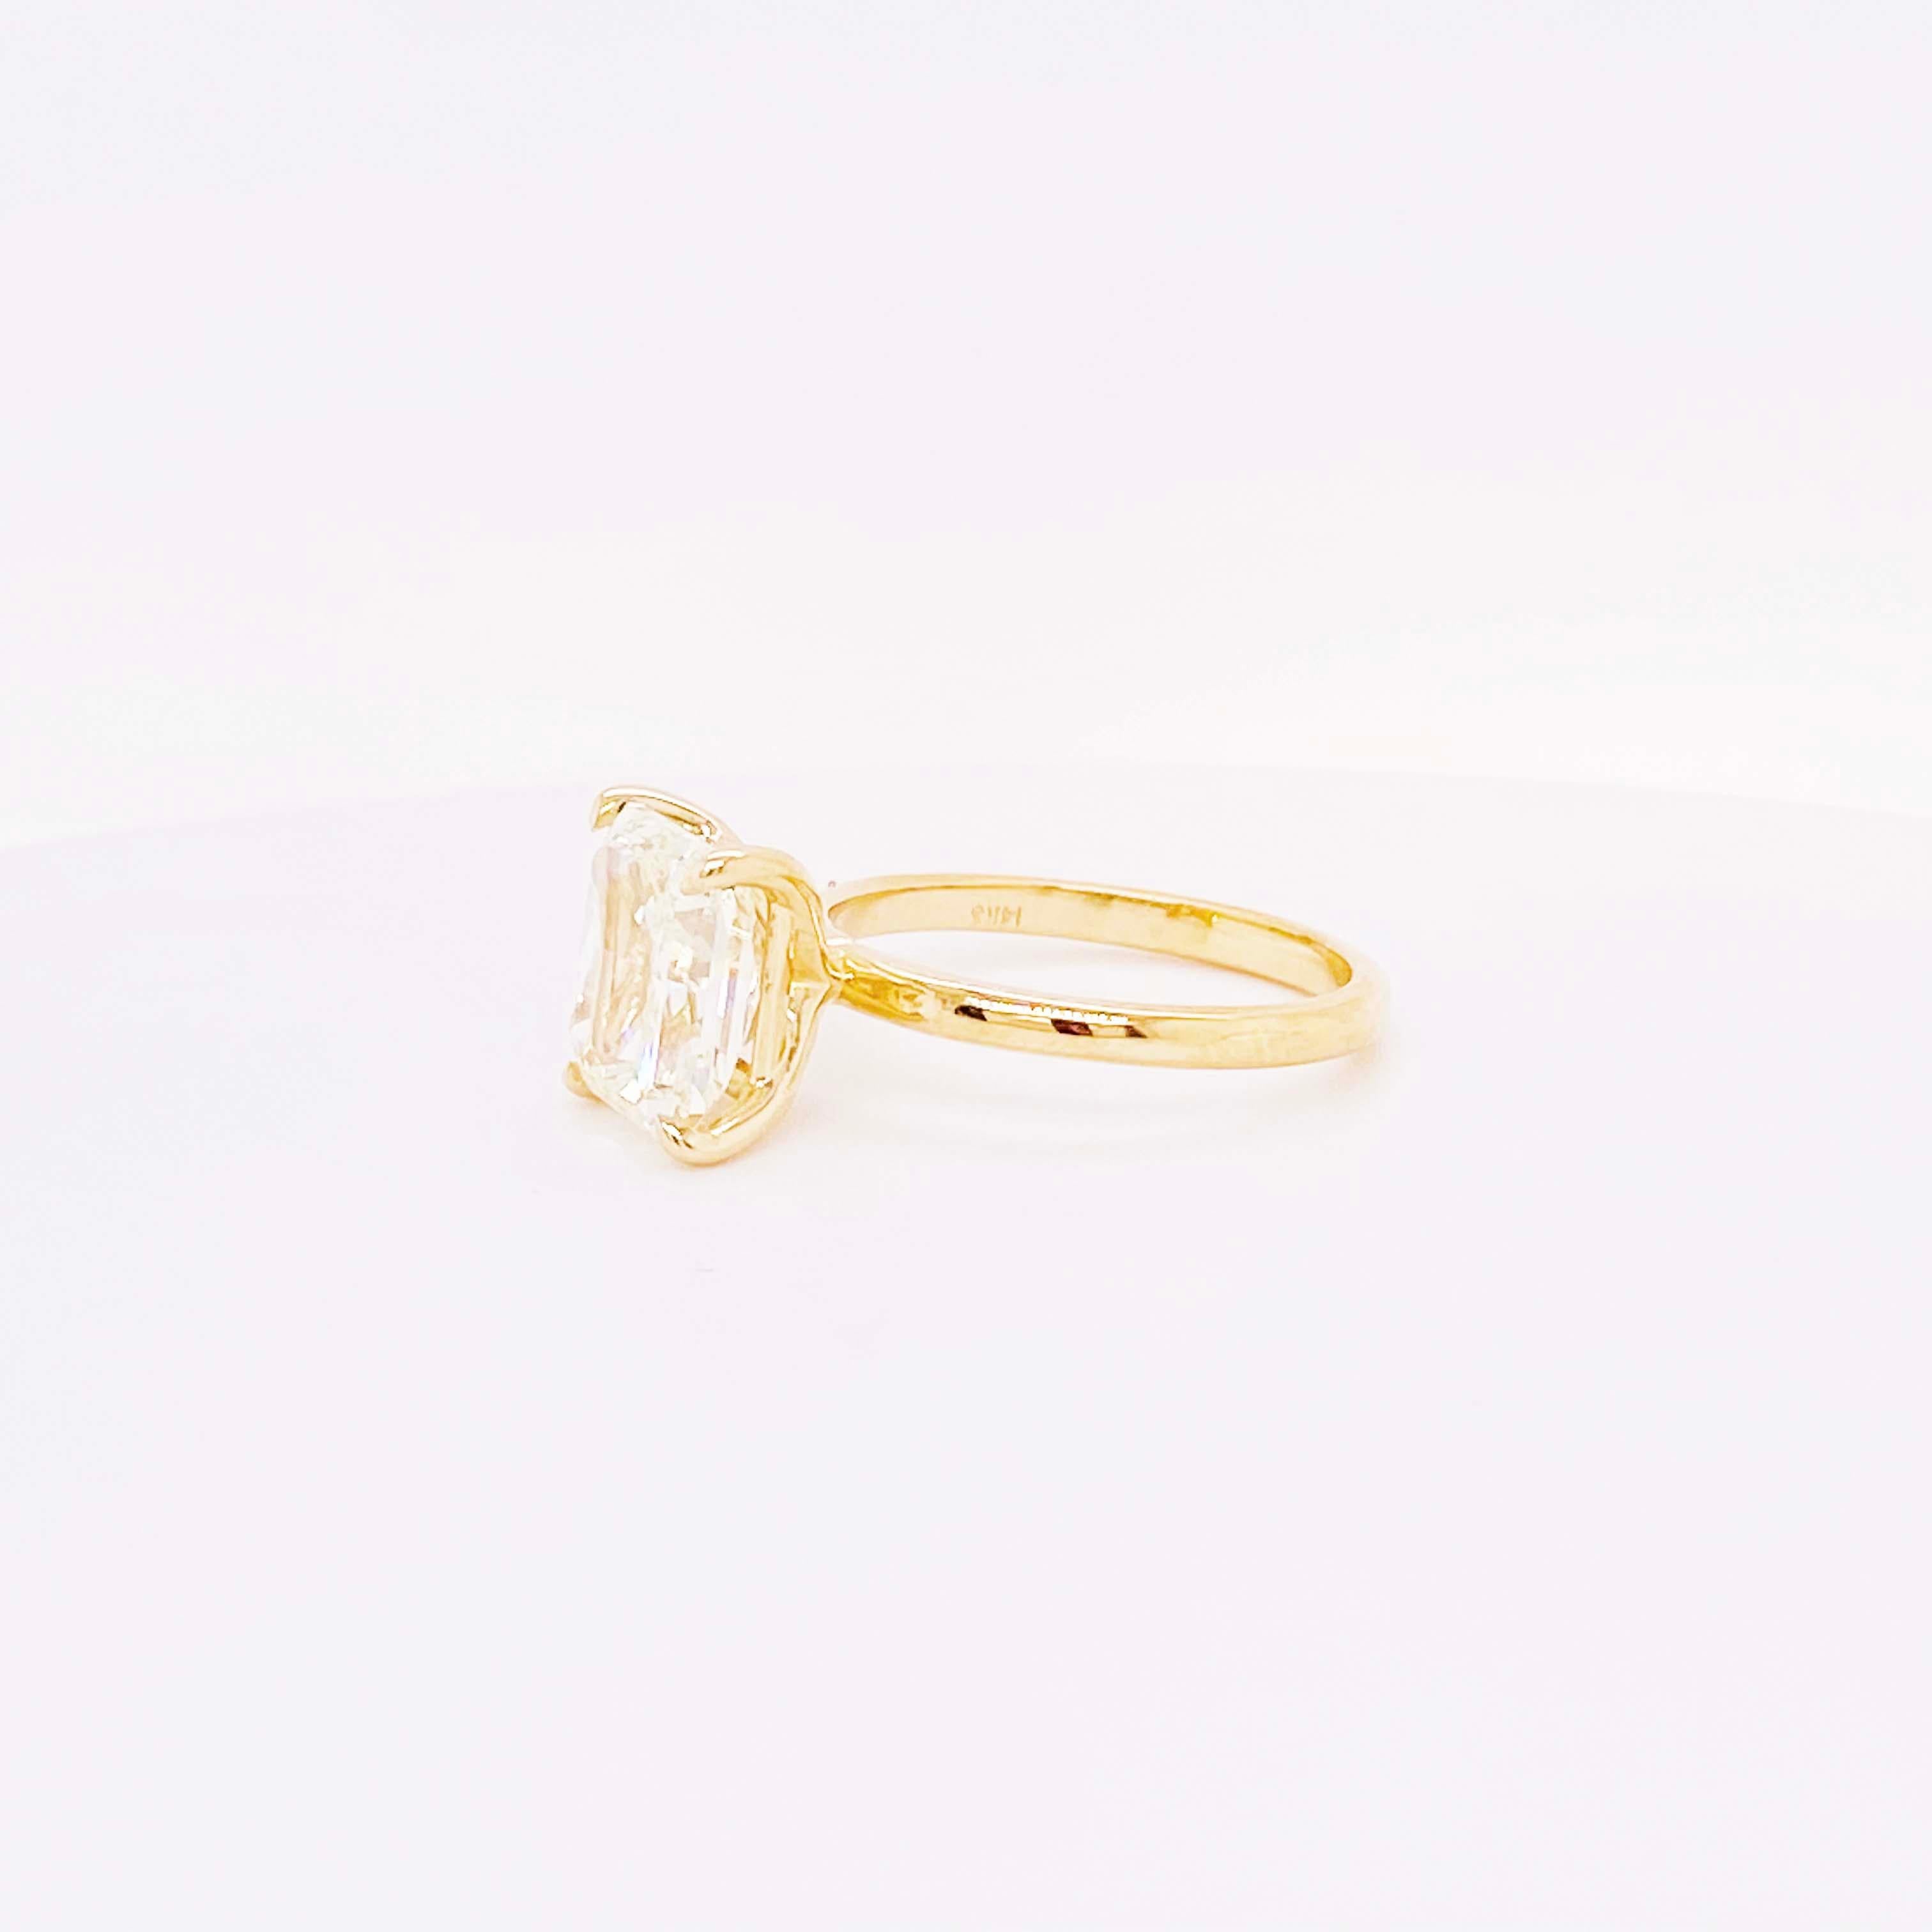 Radiant Cut Made-to-Order GIA Radiant Diamond Solitaire Engagement Ring 14 Karat Yellow Gold